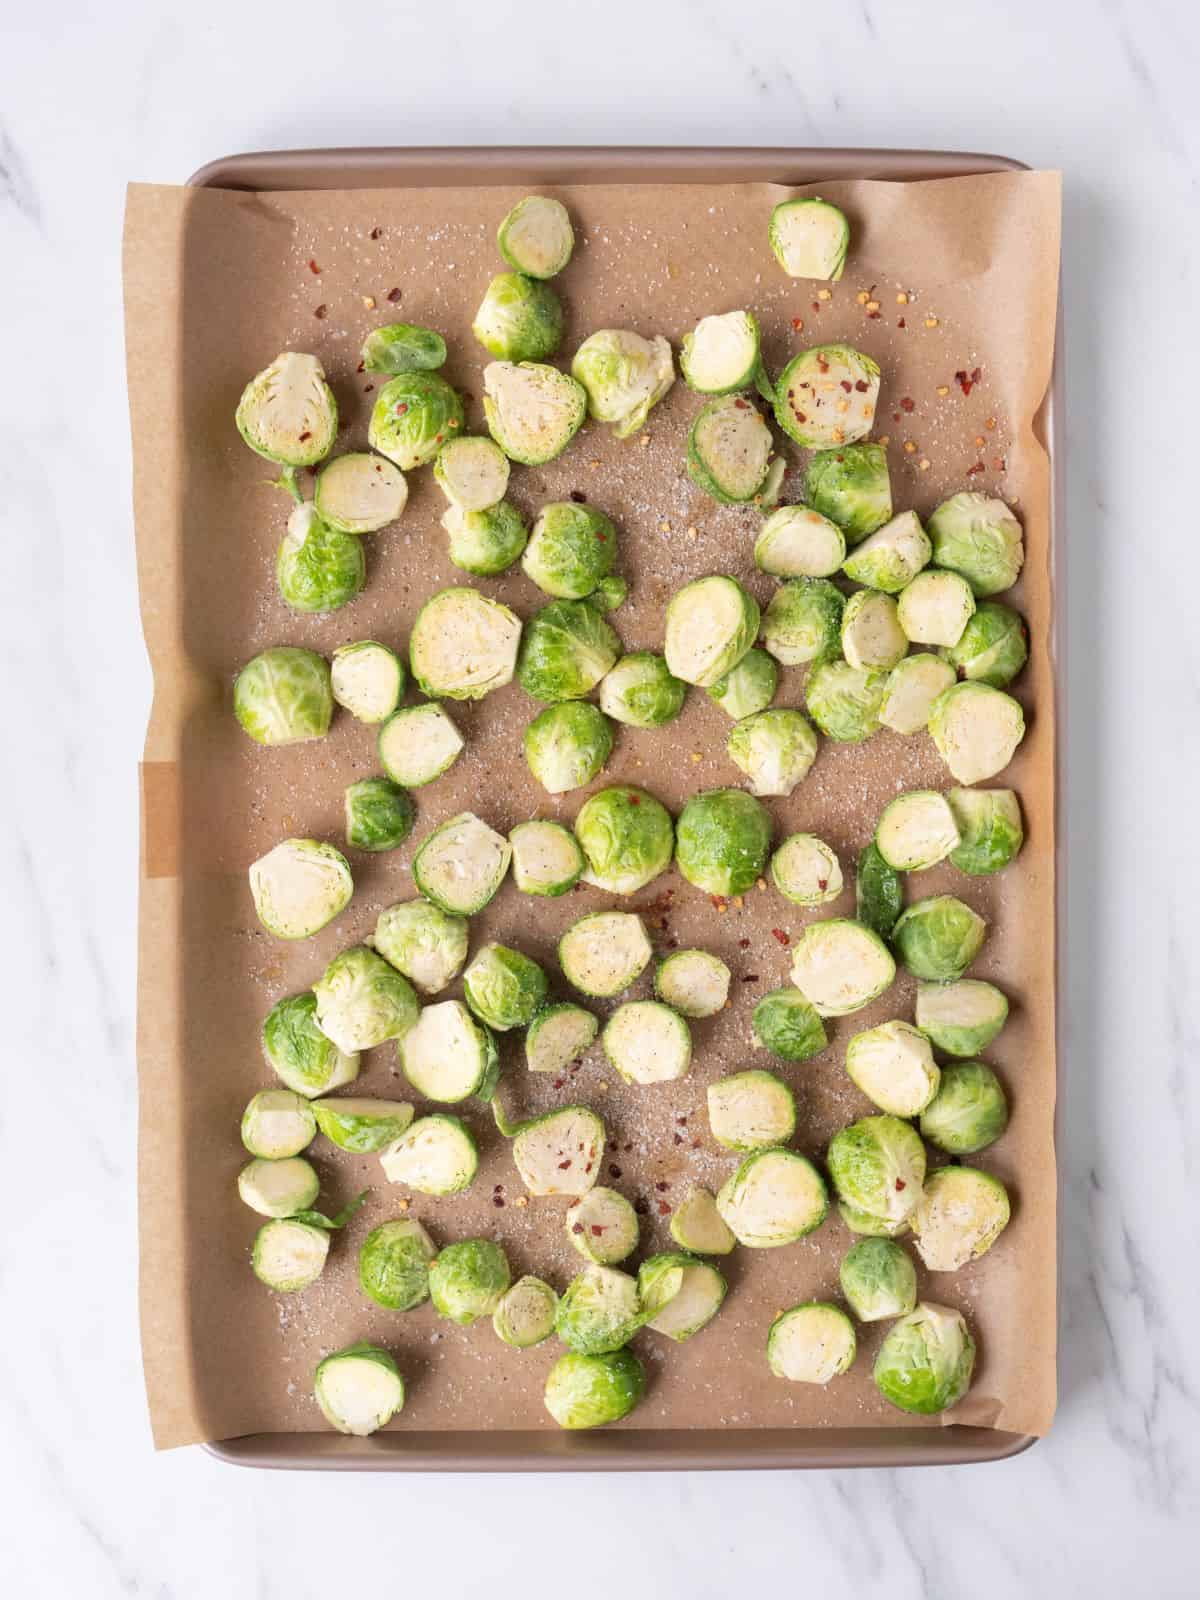 A baking sheet pan lined with parchment paper with halved raw brussels sprouts laid out, coated in oil, salt, pepper and red pepper flakes.